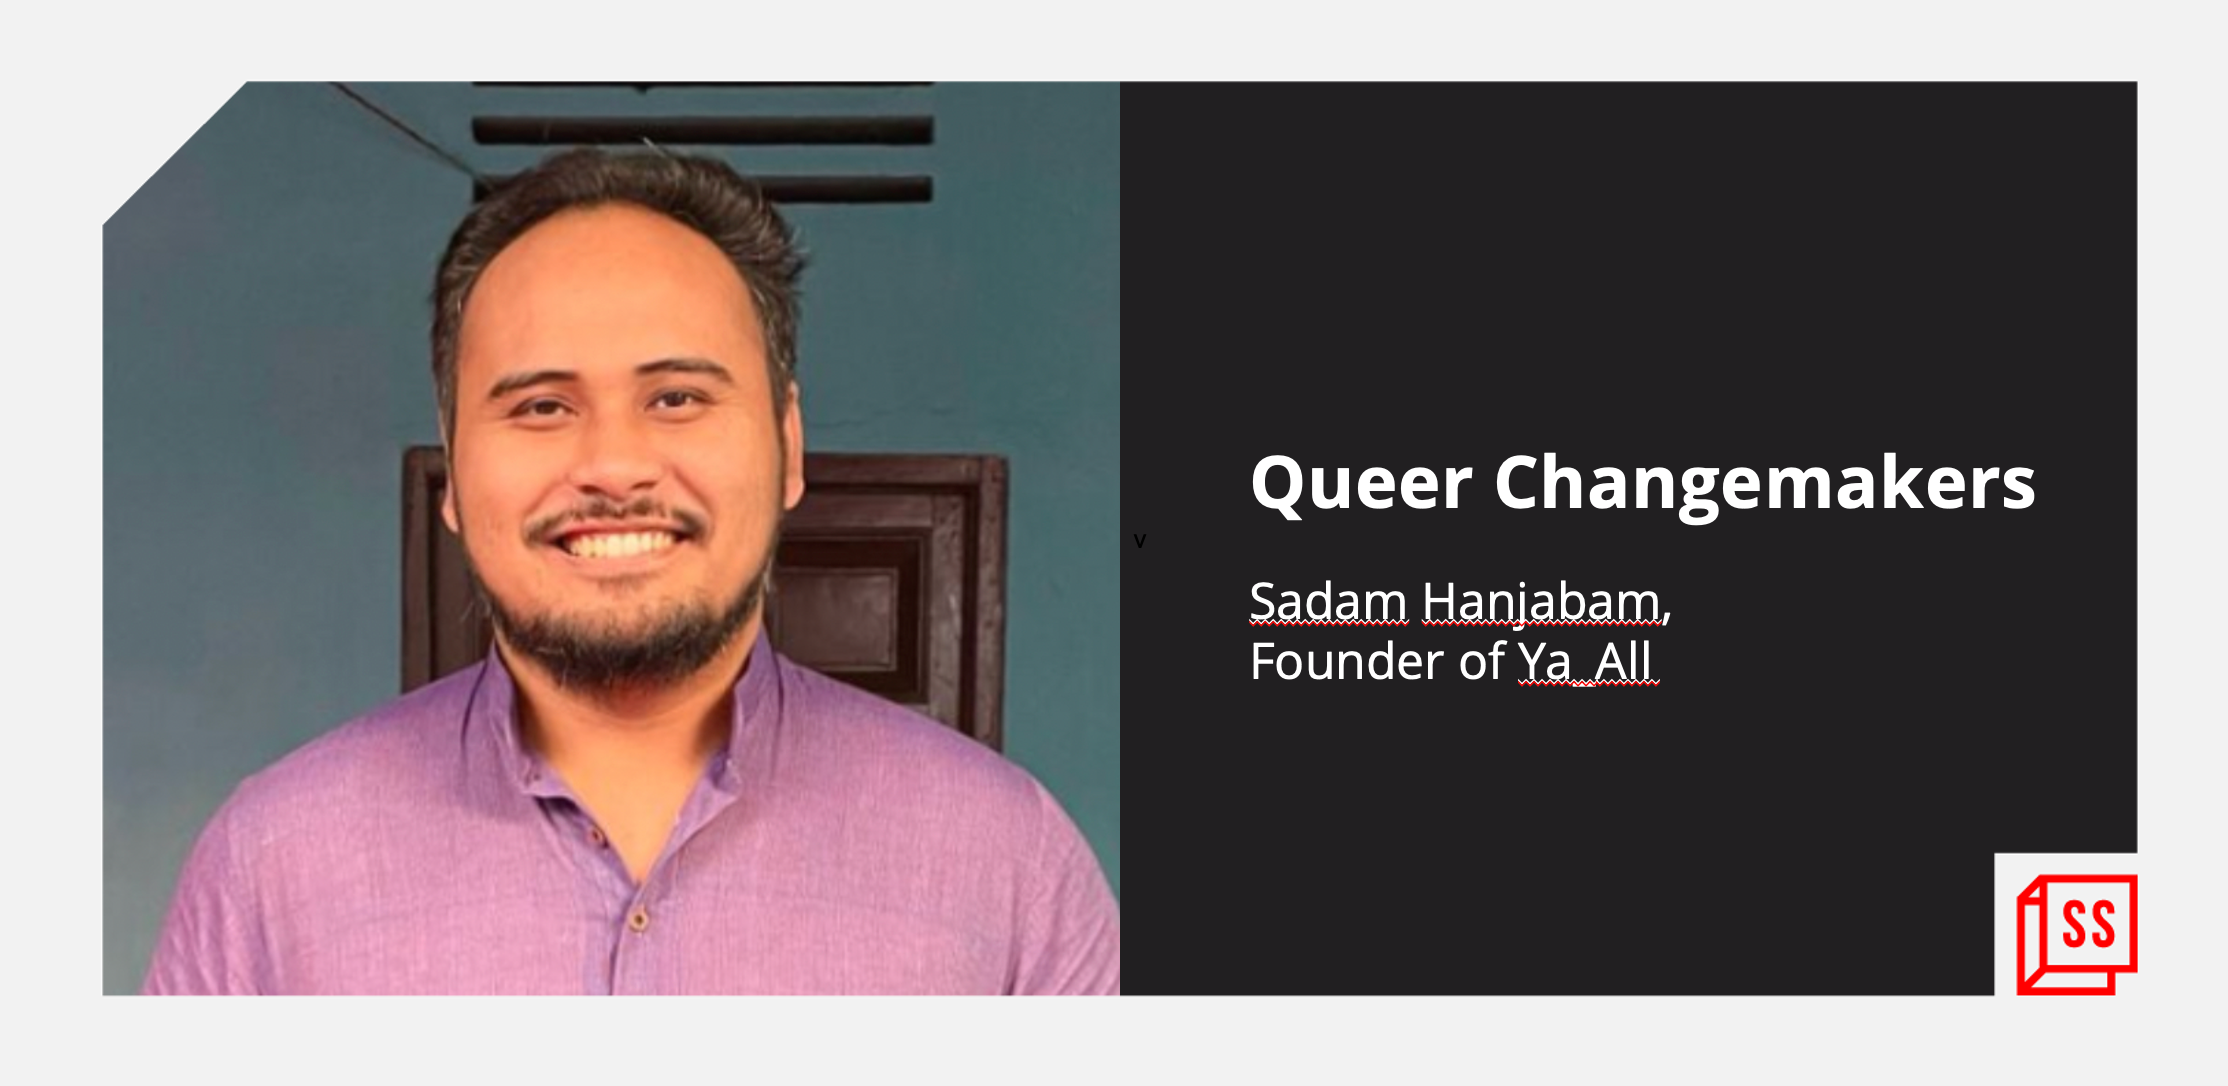 [Queer Changemakers] Ya_All is on a mission to Educate, Equip, Empower
